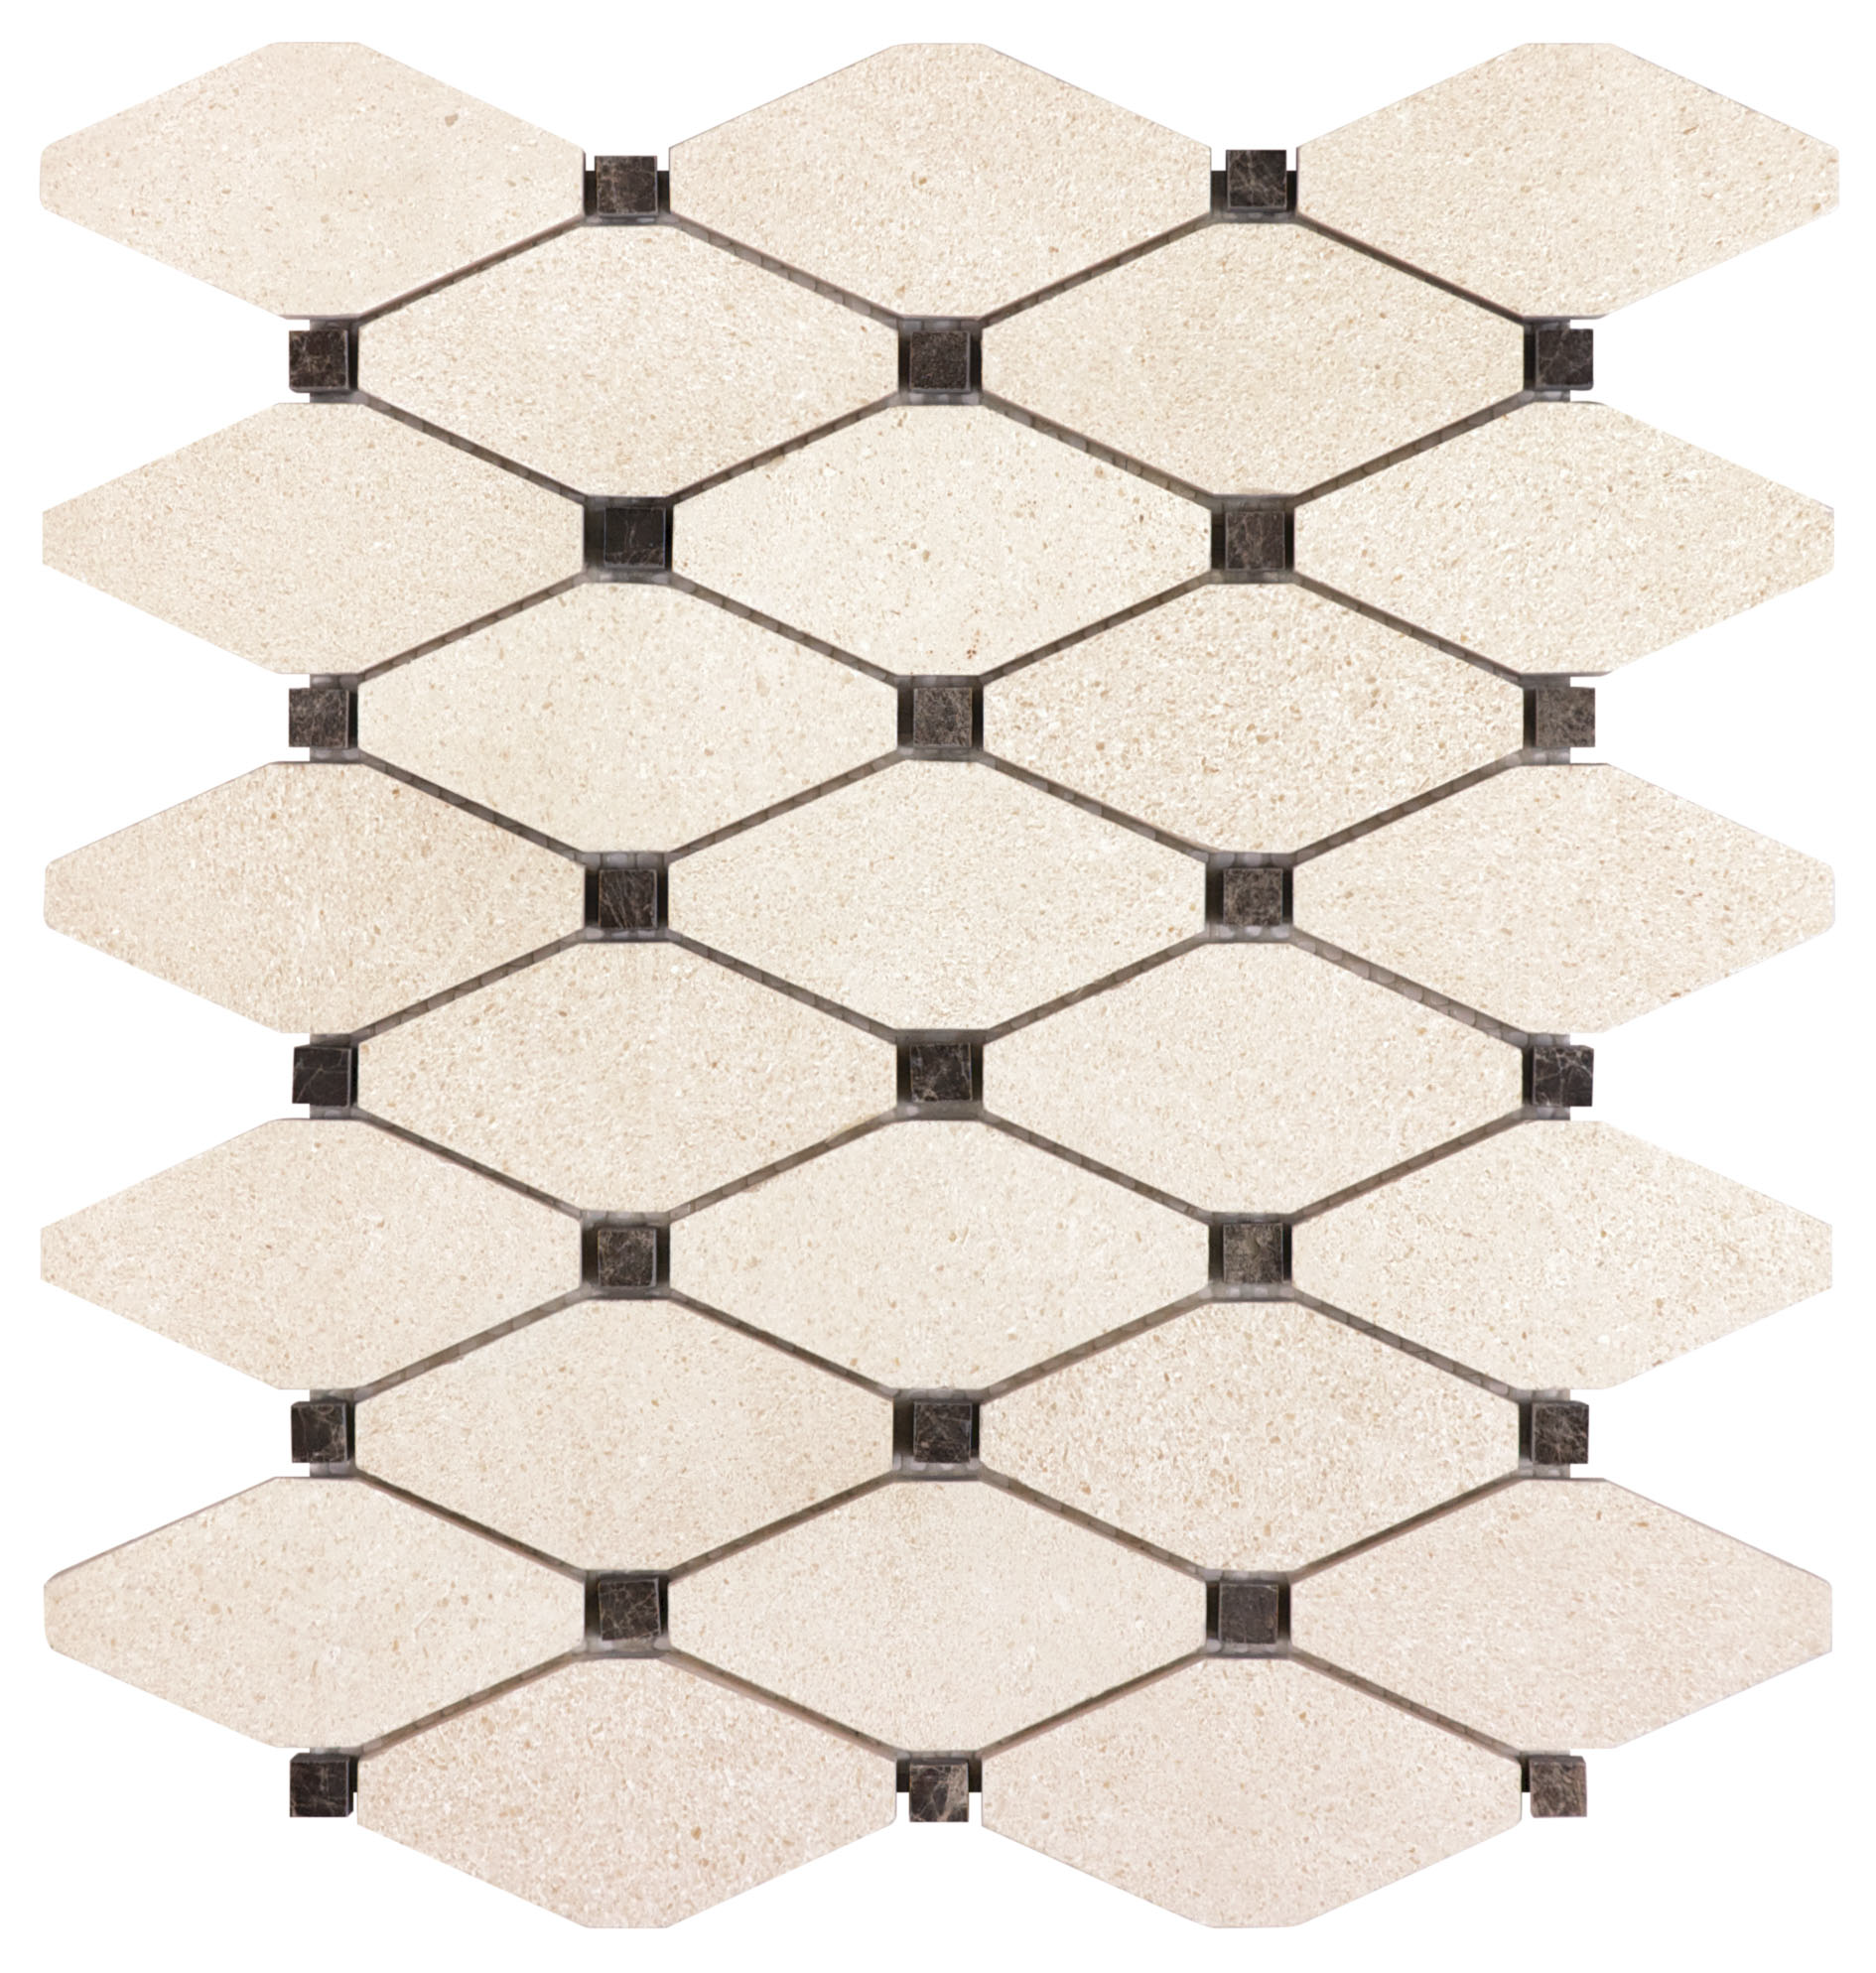 limestone clipped diamond pattern natural stone mosaic from serene ivory anatolia collection distributed by surface group international honed finish straight edge edge mesh shape